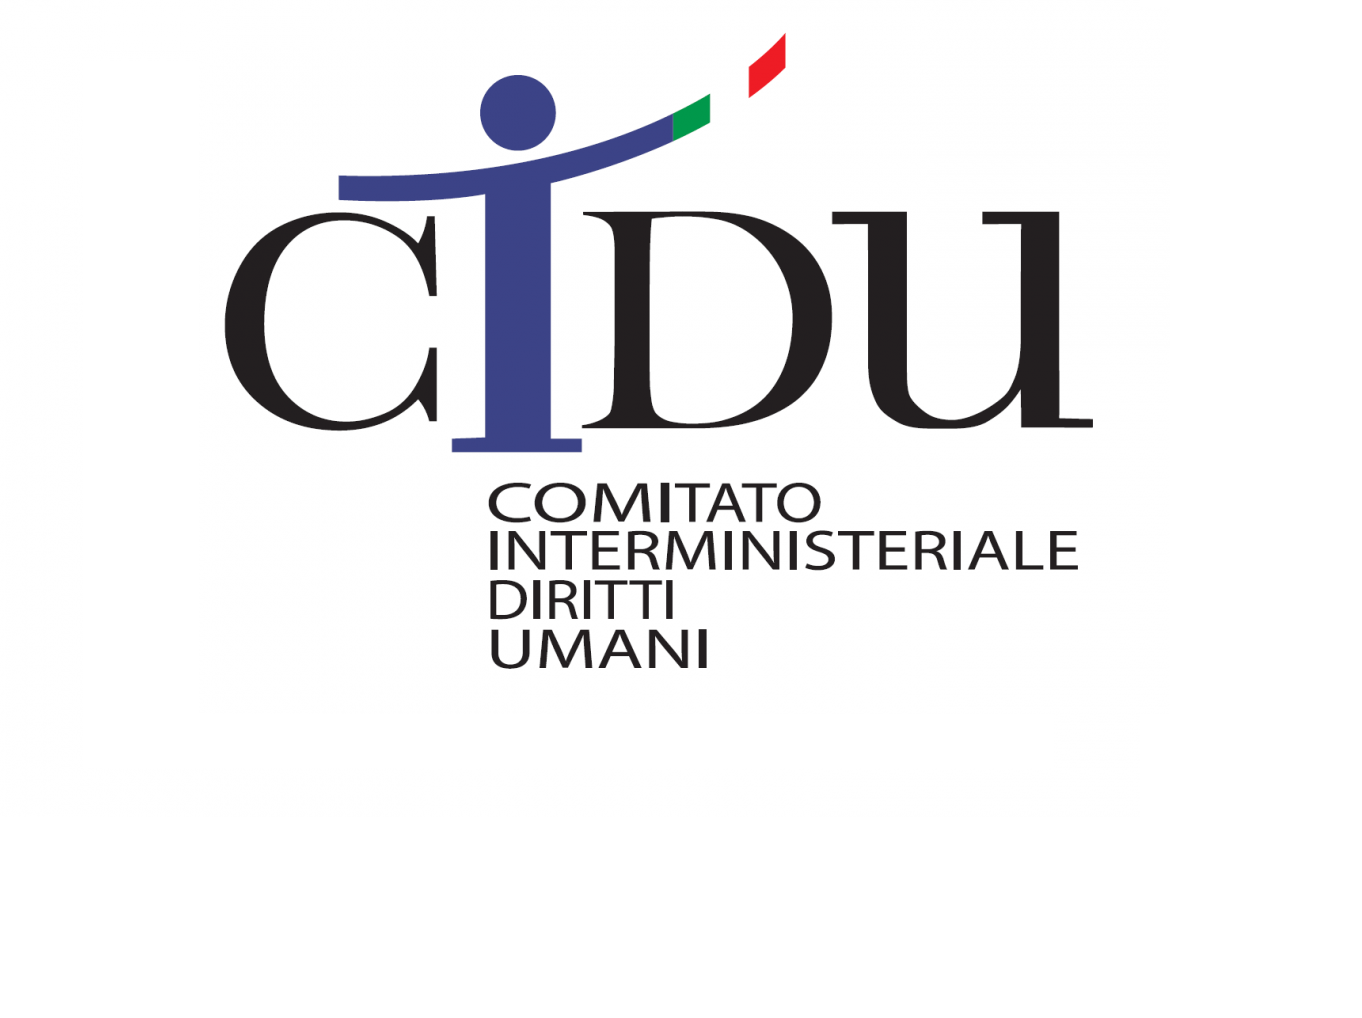 Launch of the Public consultation on the Second Italian National Action Plan on Business and Human Rights 2021-2026 (PANBHR)